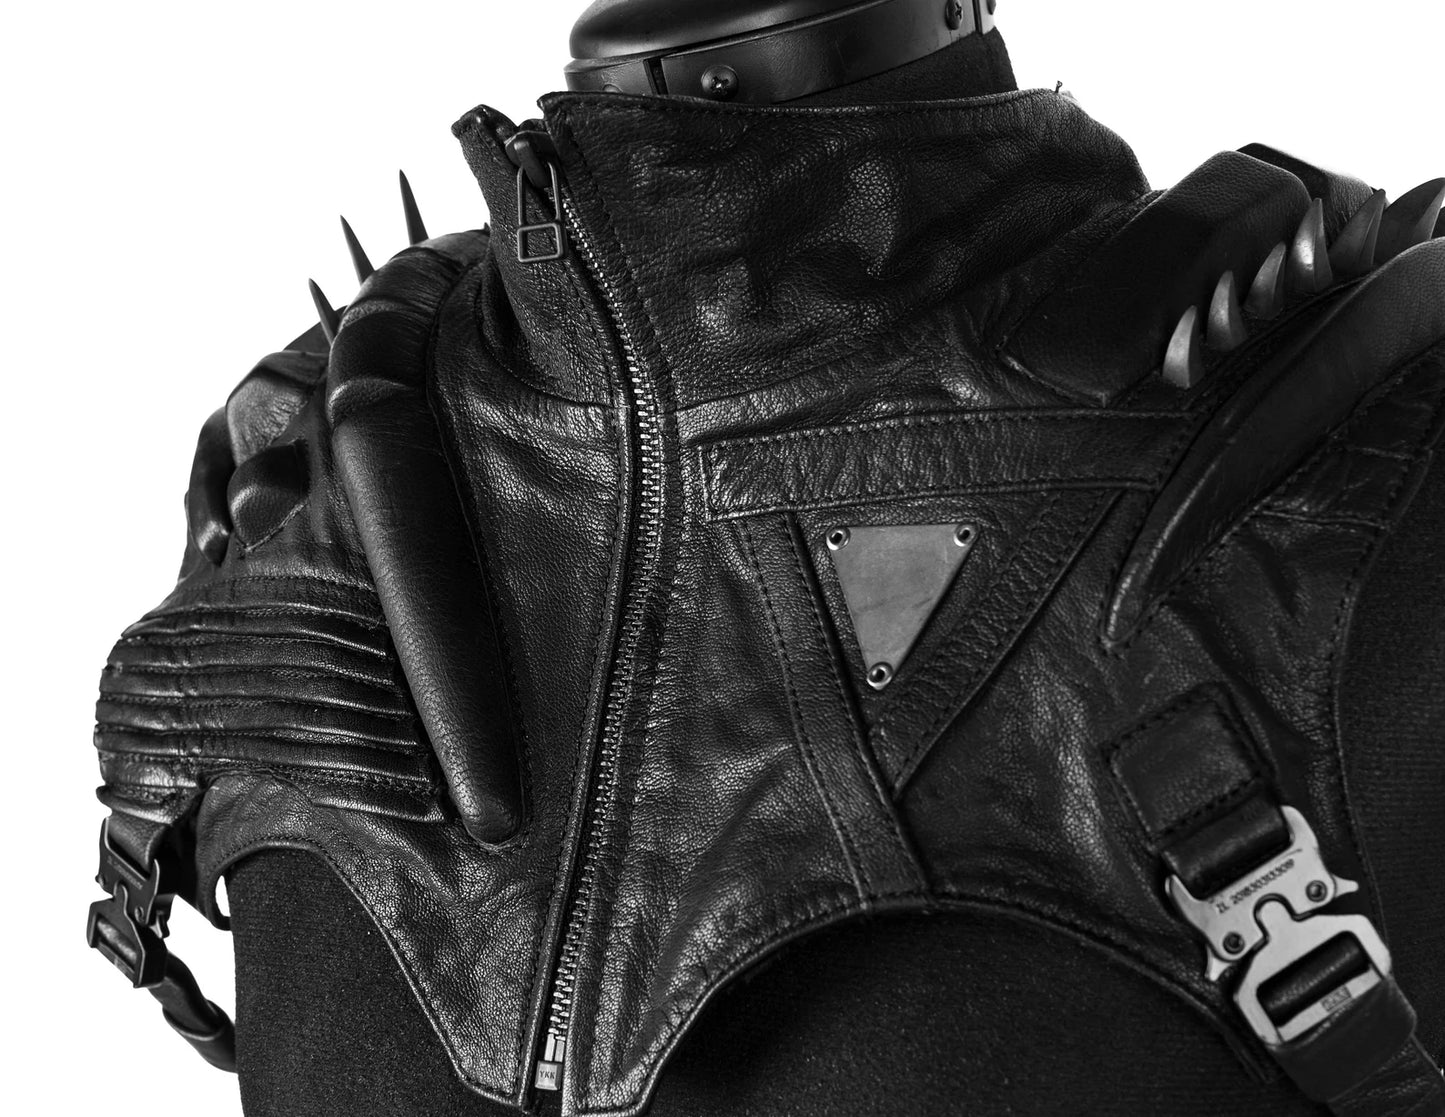 Solo Enforcer Black Leather Chest Plate w/ Metal Spikes